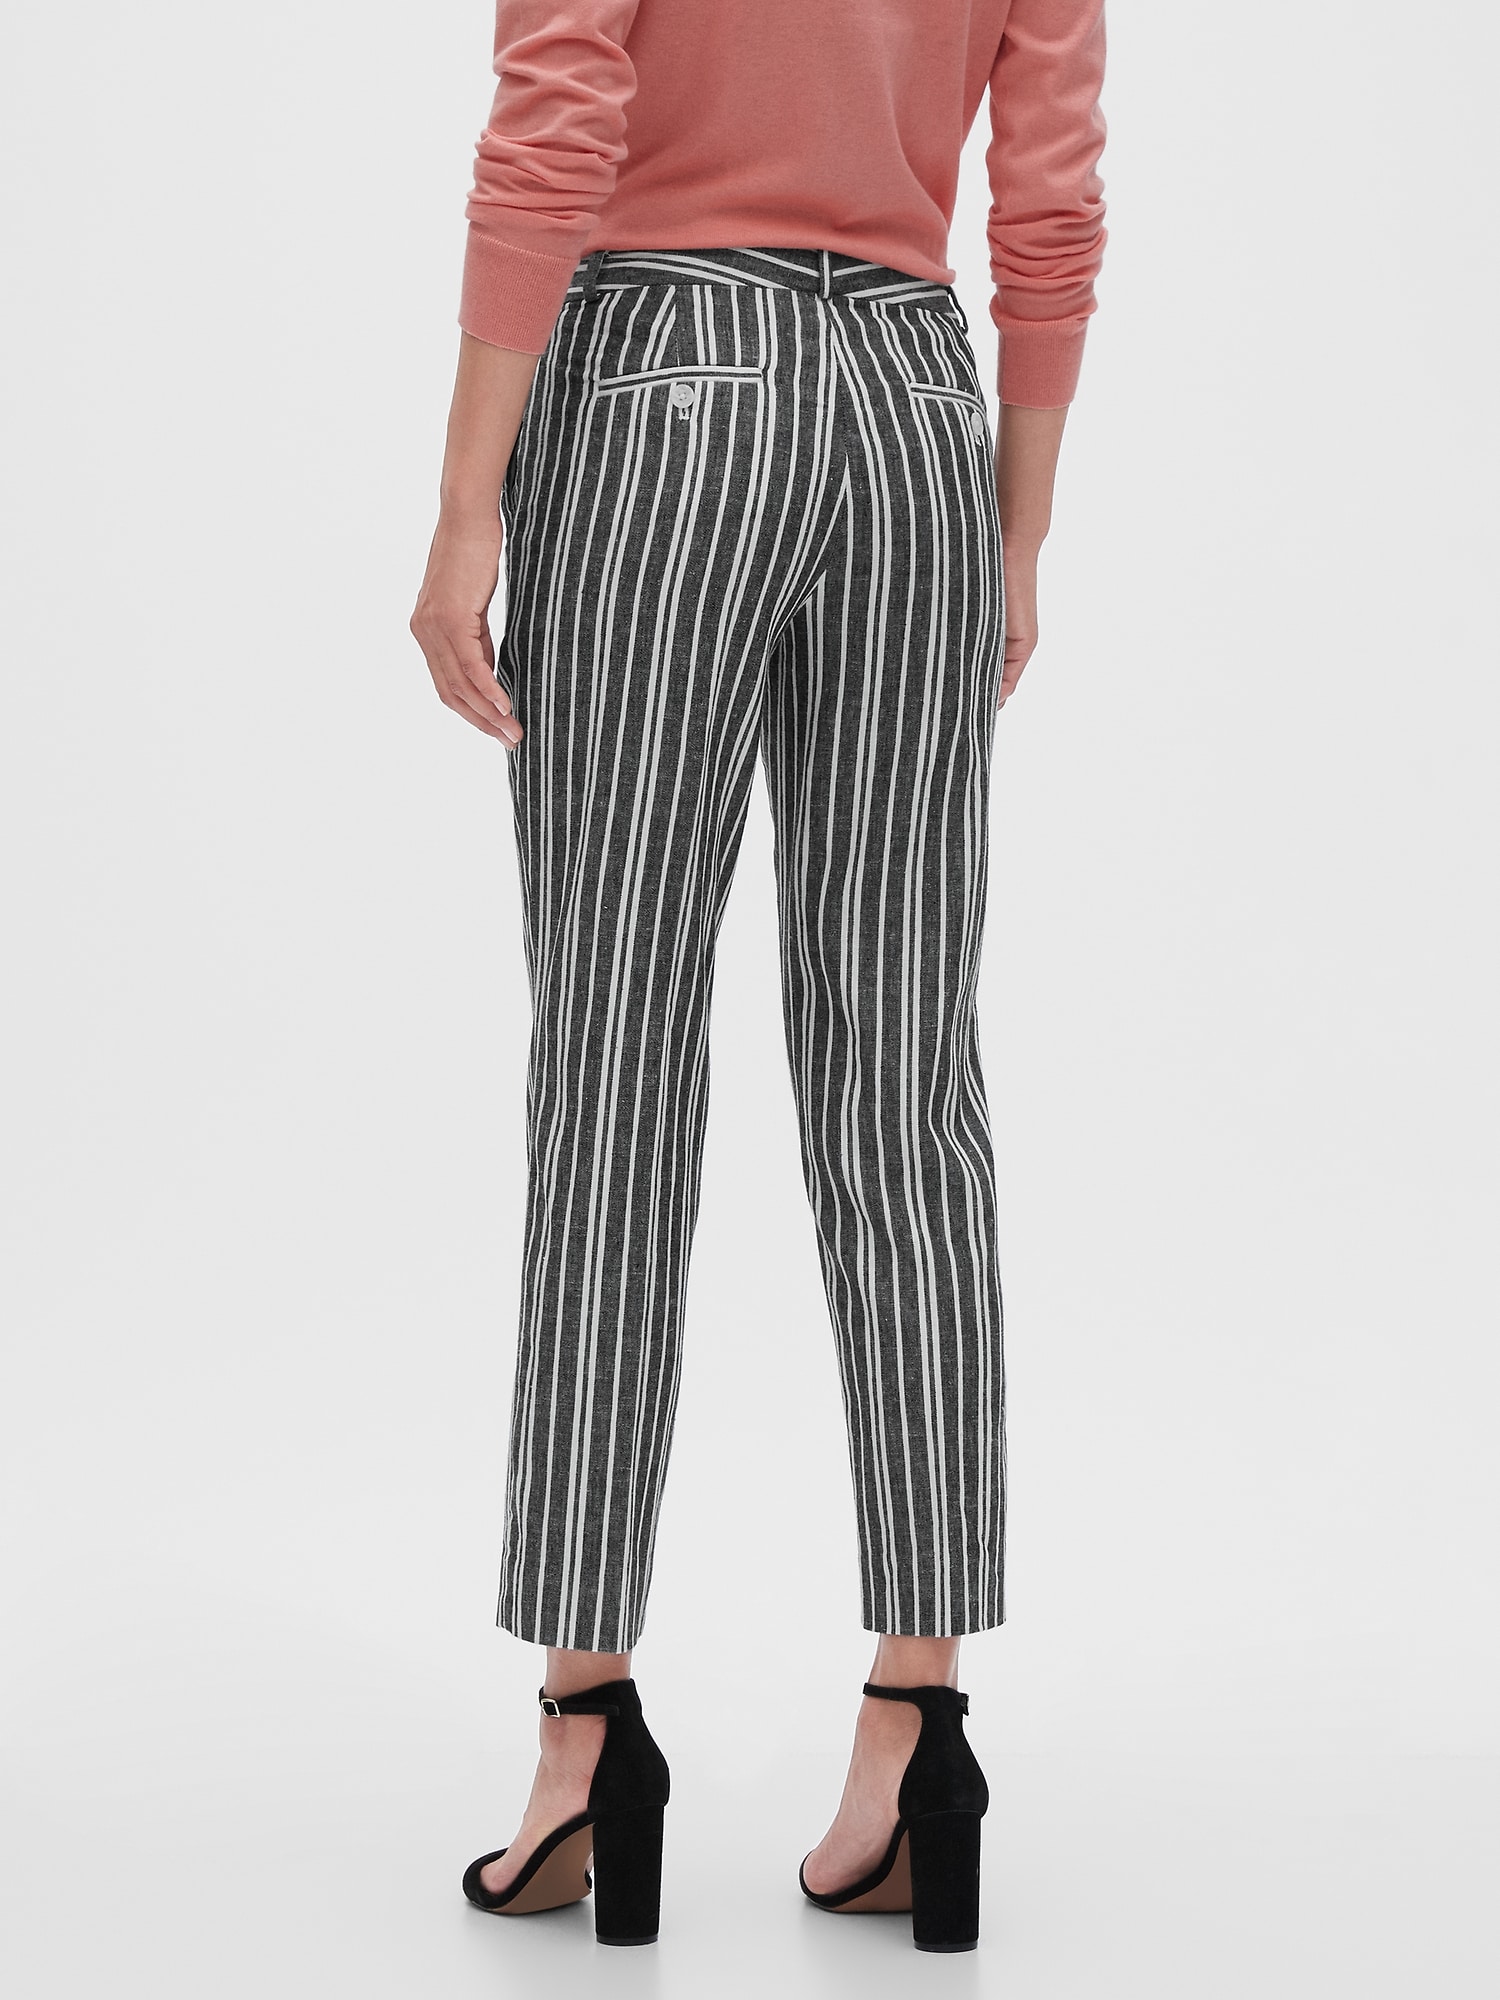 Petite Avery Striped Linen Blend Tailored Ankle Pant